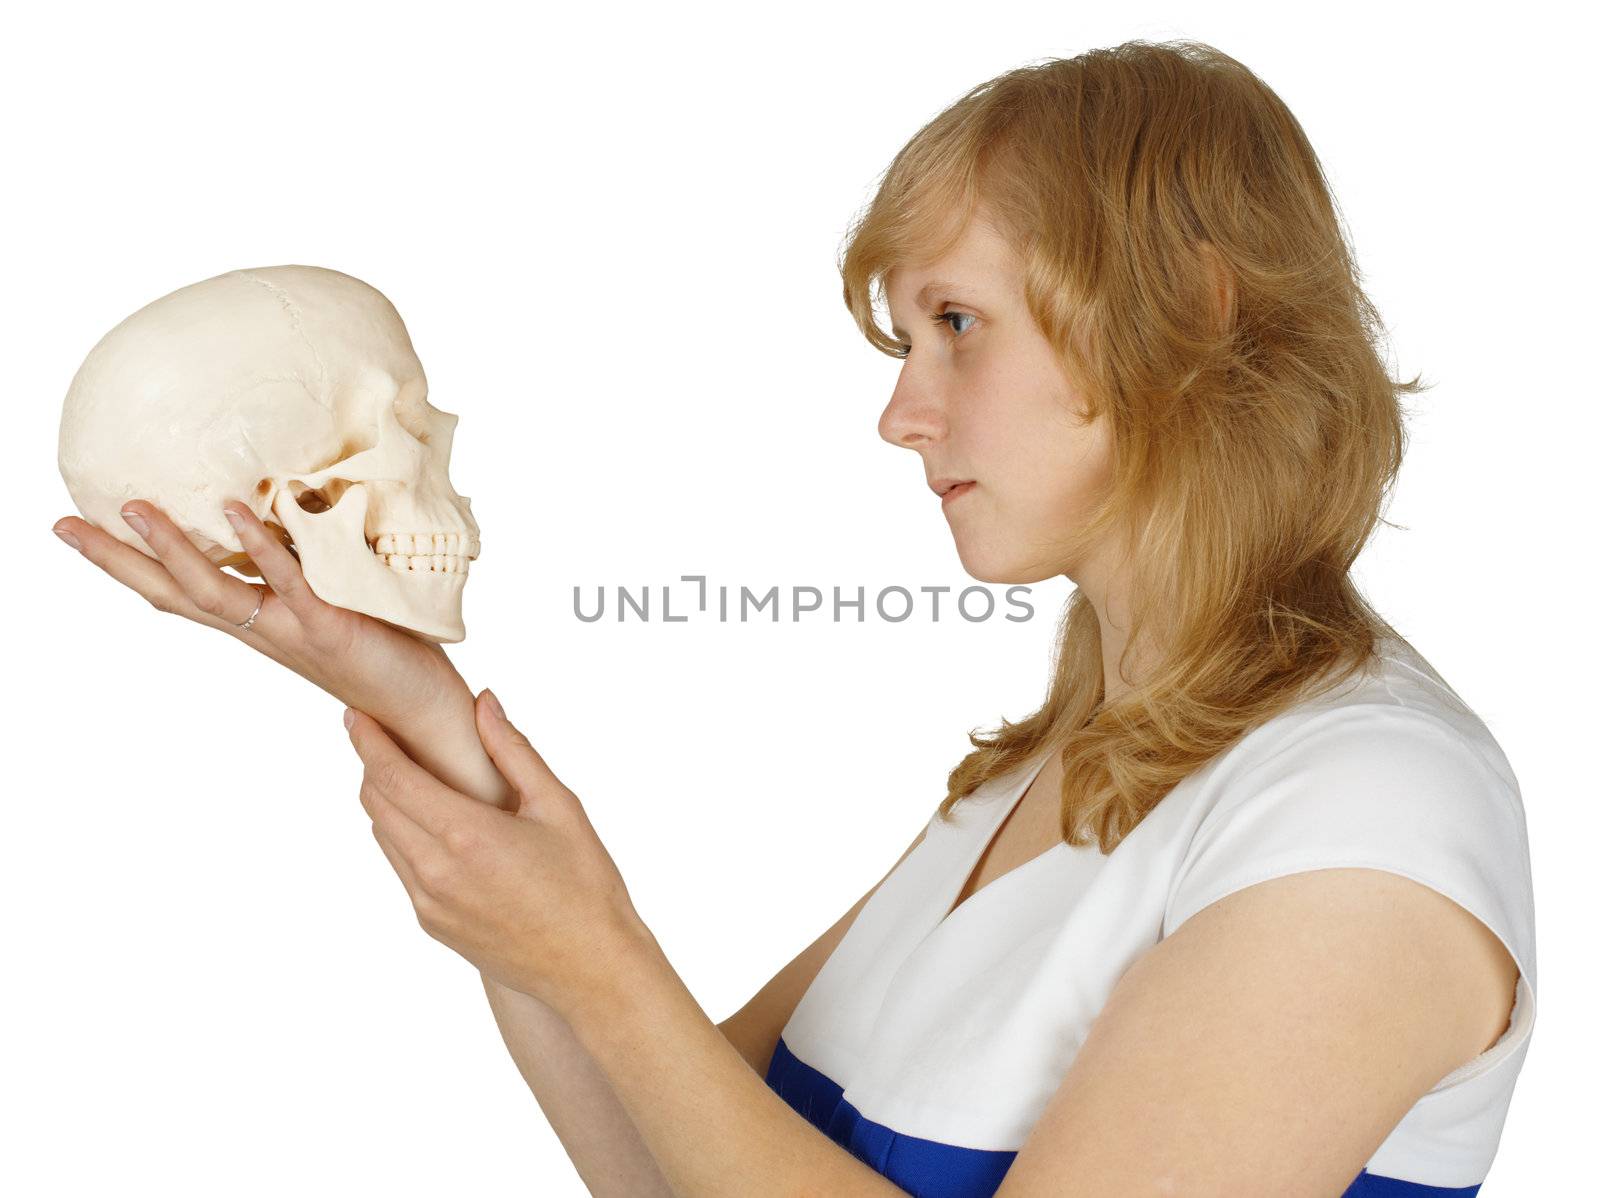 Woman examines a human skull on white by pzaxe